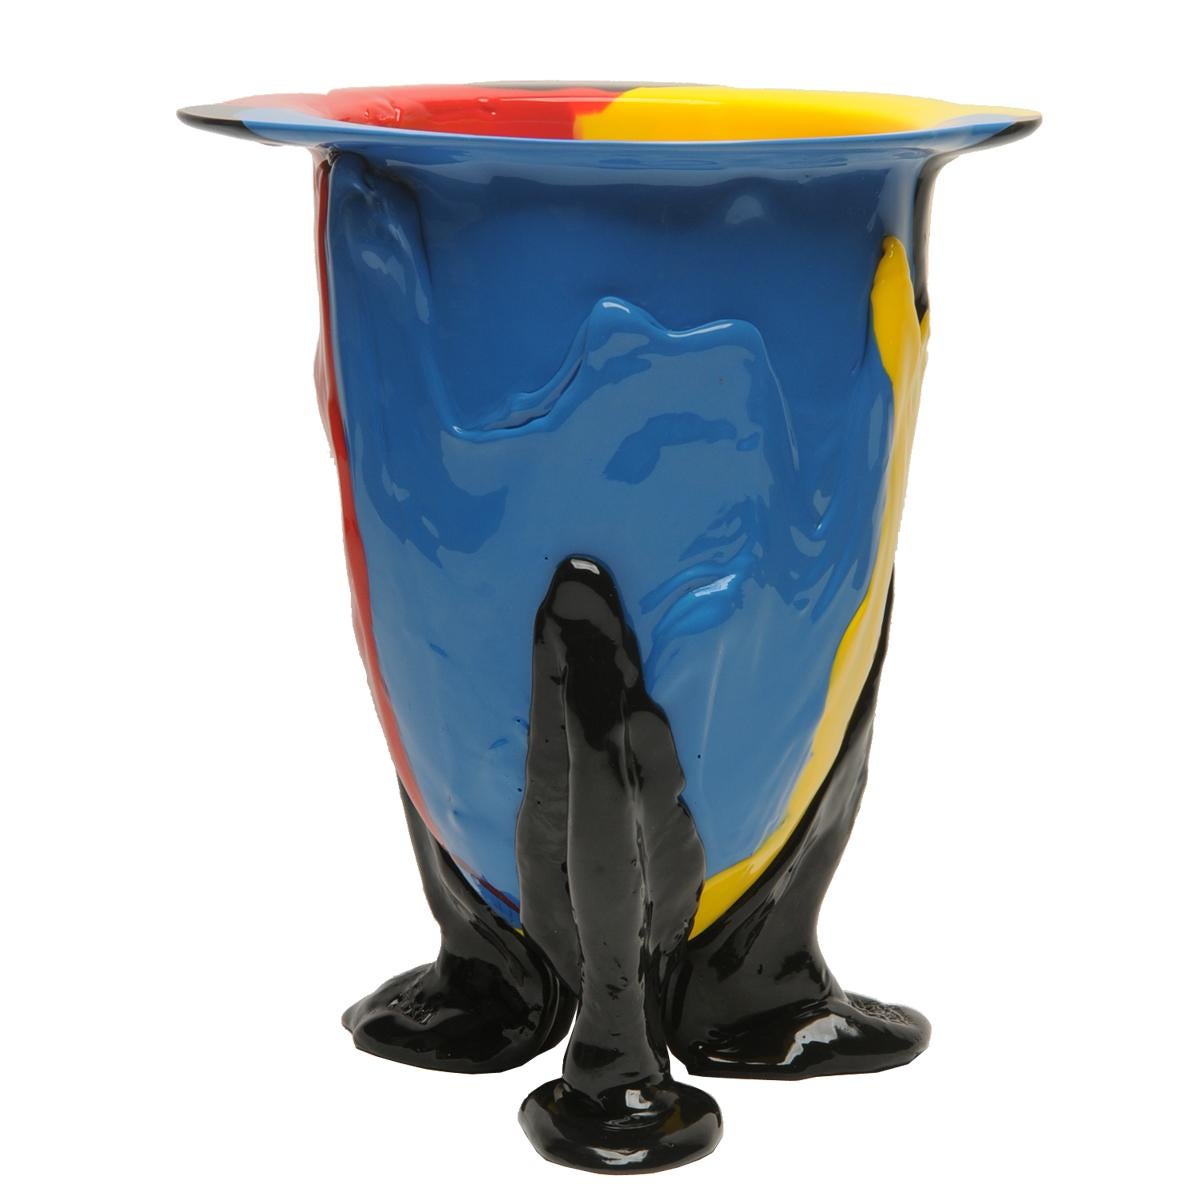 Arts and Crafts Contemporary Gaetano Pesce Amazonia L Vase Resin Red Yellow Blue Black For Sale